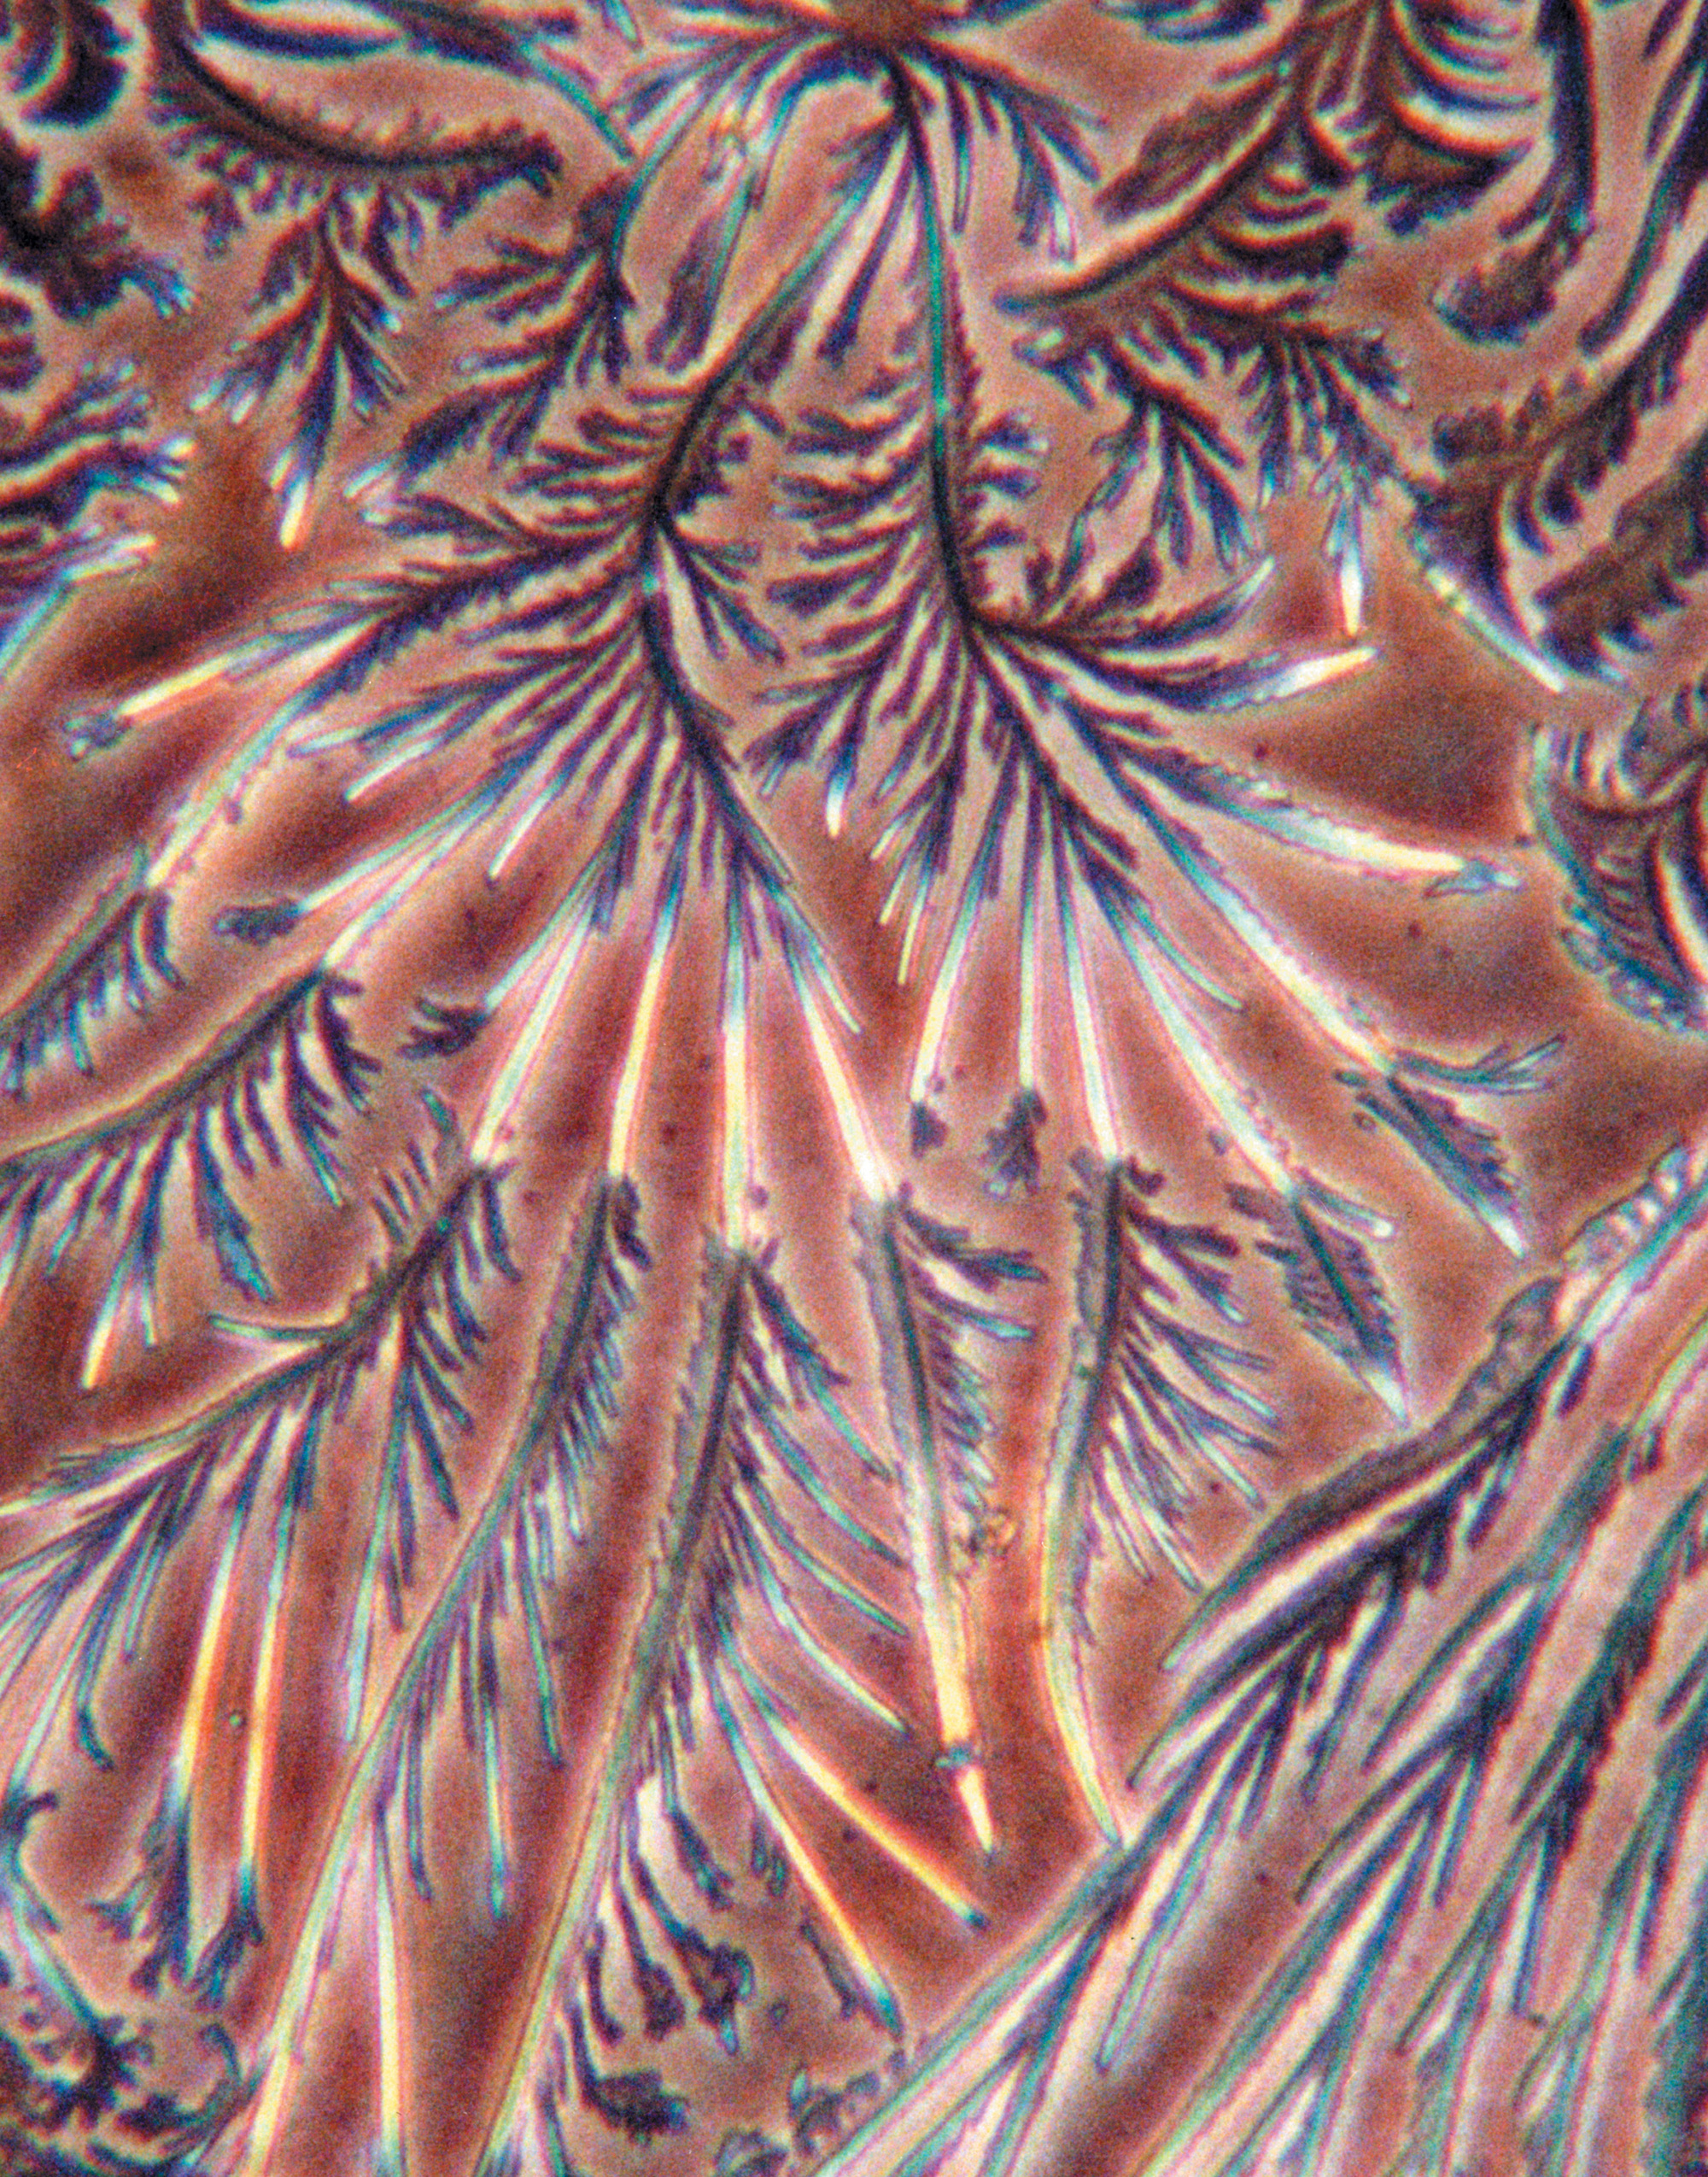 Microphotograph of prothrombin dried on a glass slide. The fern-like fractal structure of this bio-polymer responsible for blood clotting demonstrates its liquid crystalinity.